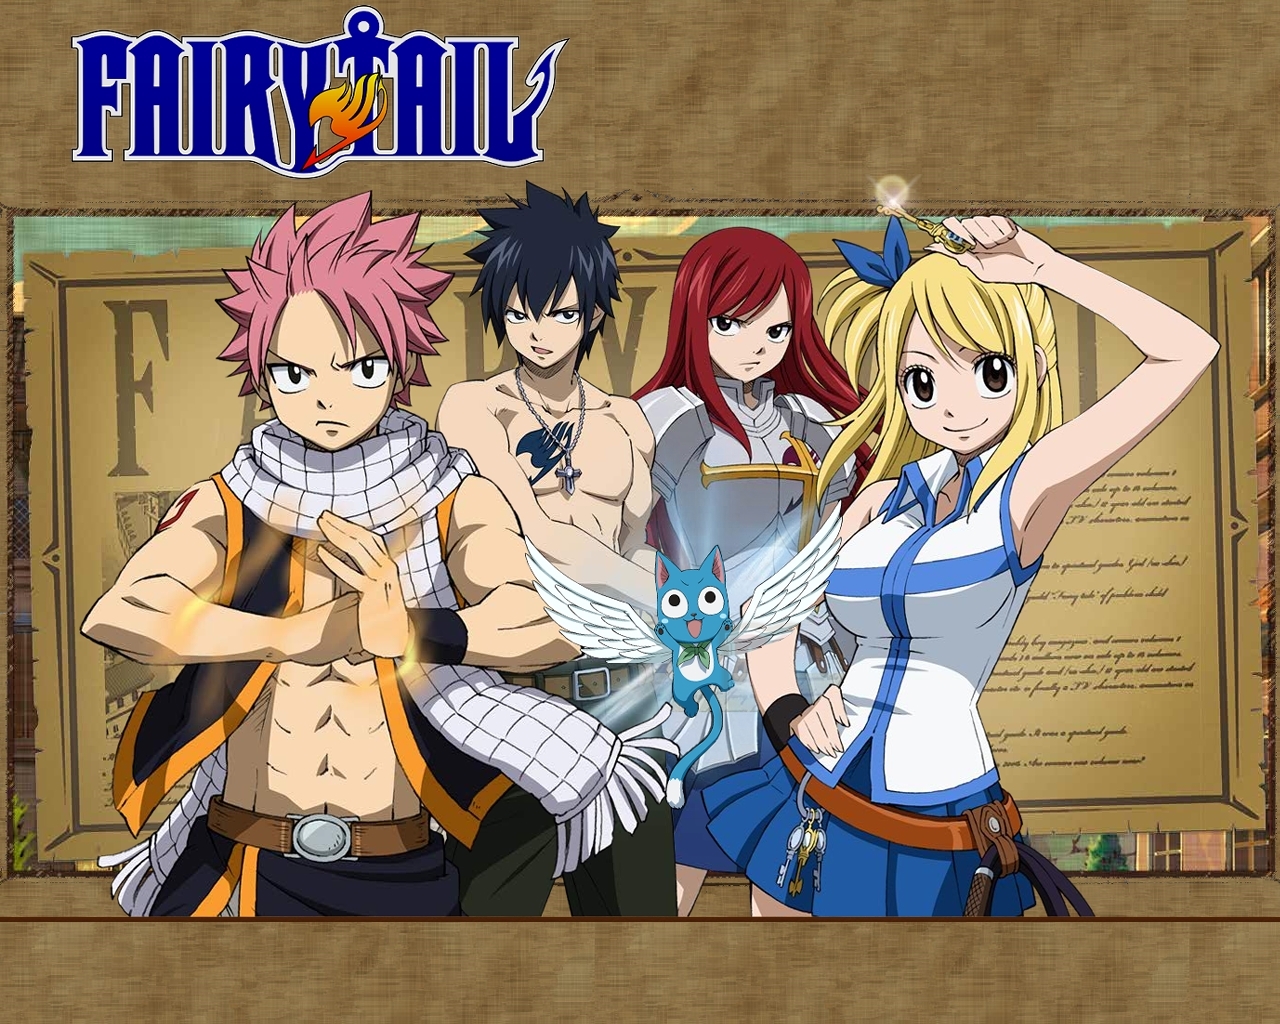 Anime of The Week] Fairy Tail, Magic Themed Anime With a Lively Story |  Dunia Games